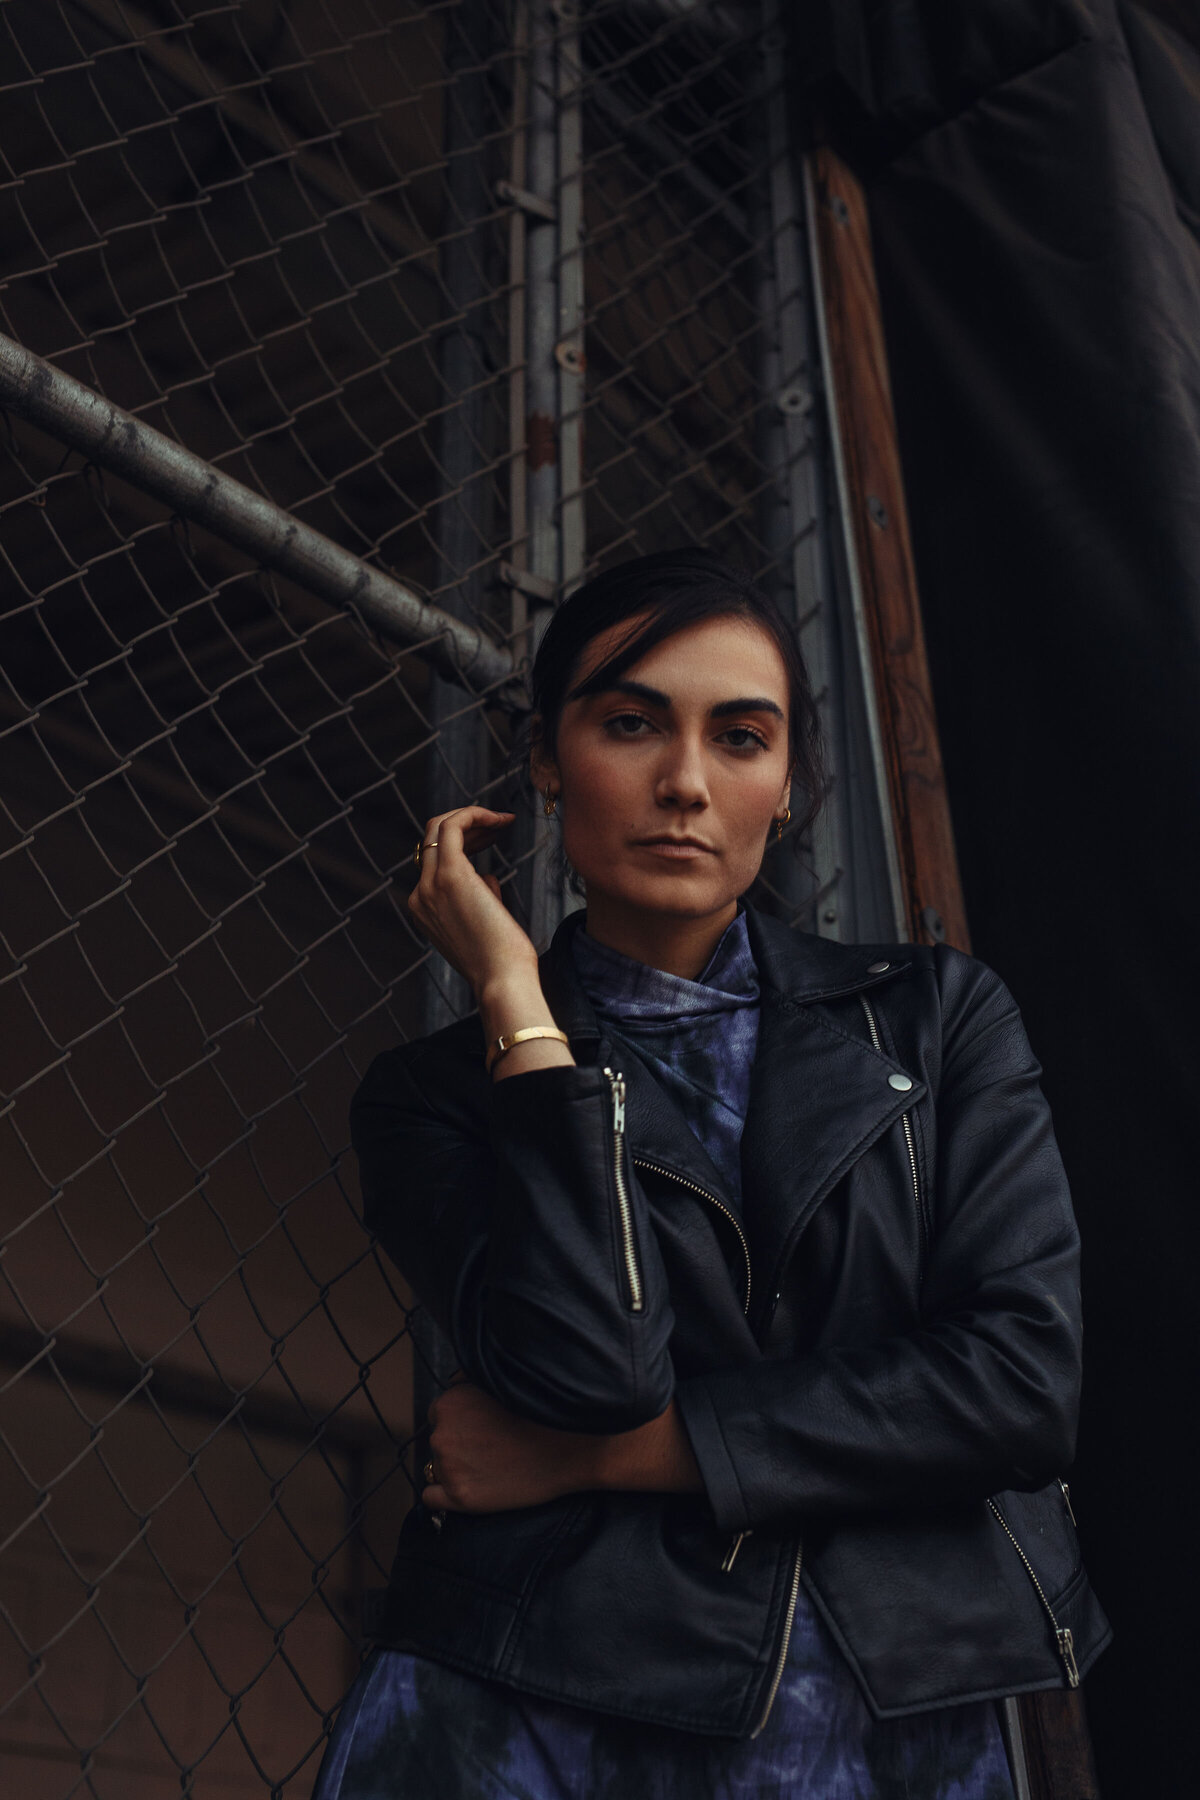 Portrait Photo Of Young Woman In Black Leather Jacket With One Hand On Her Waist Los Angeles